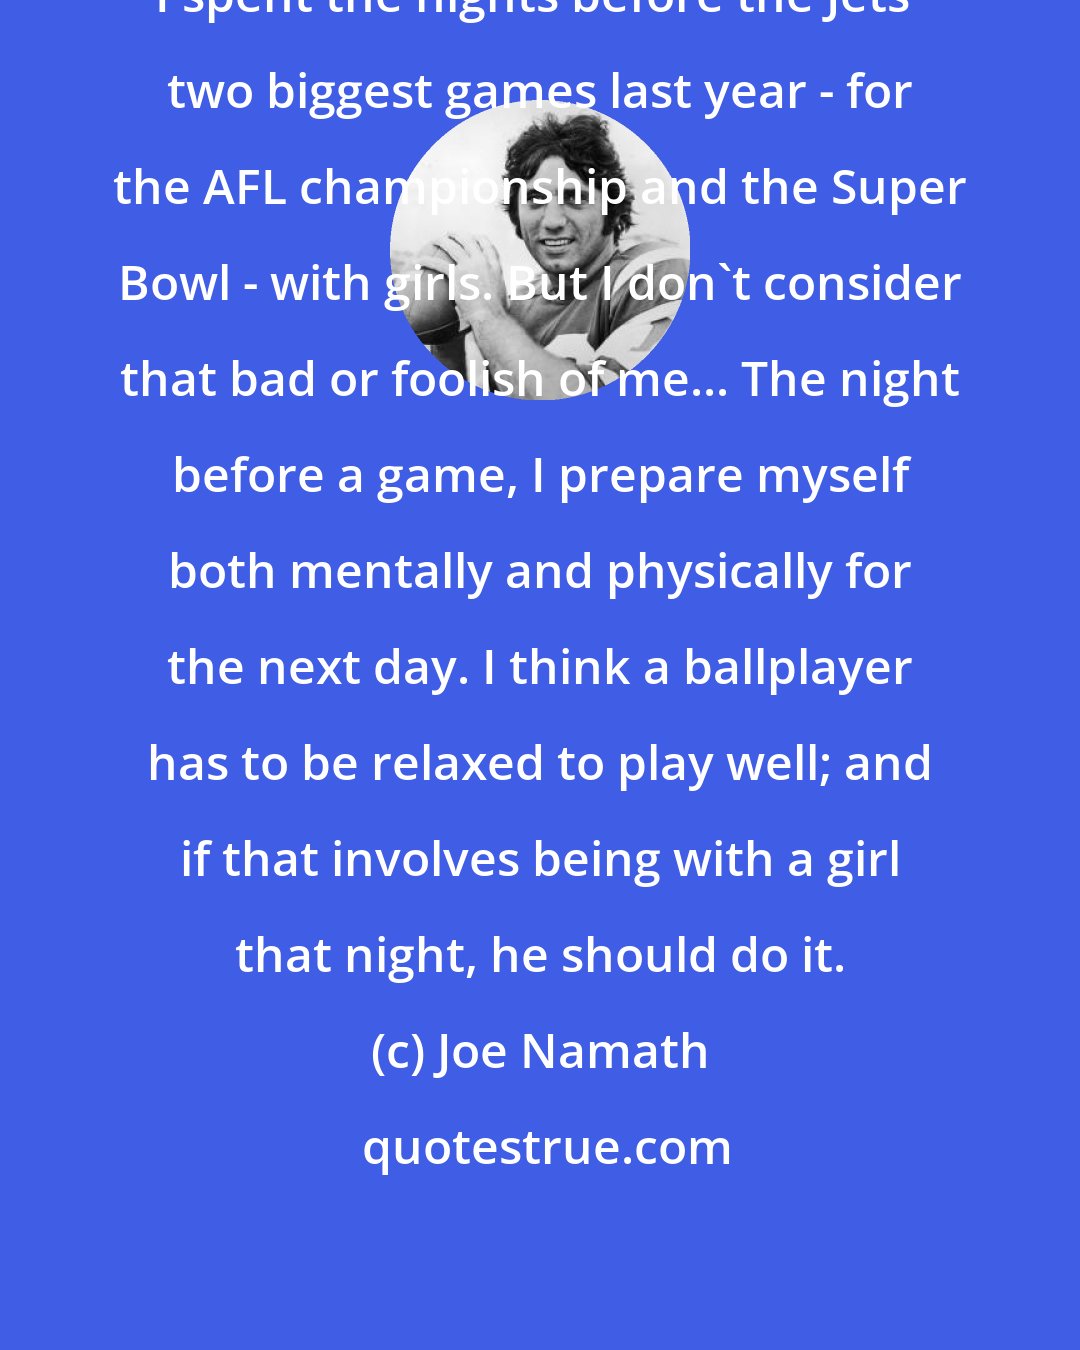 Joe Namath: I spent the nights before the Jets' two biggest games last year - for the AFL championship and the Super Bowl - with girls. But I don't consider that bad or foolish of me... The night before a game, I prepare myself both mentally and physically for the next day. I think a ballplayer has to be relaxed to play well; and if that involves being with a girl that night, he should do it.